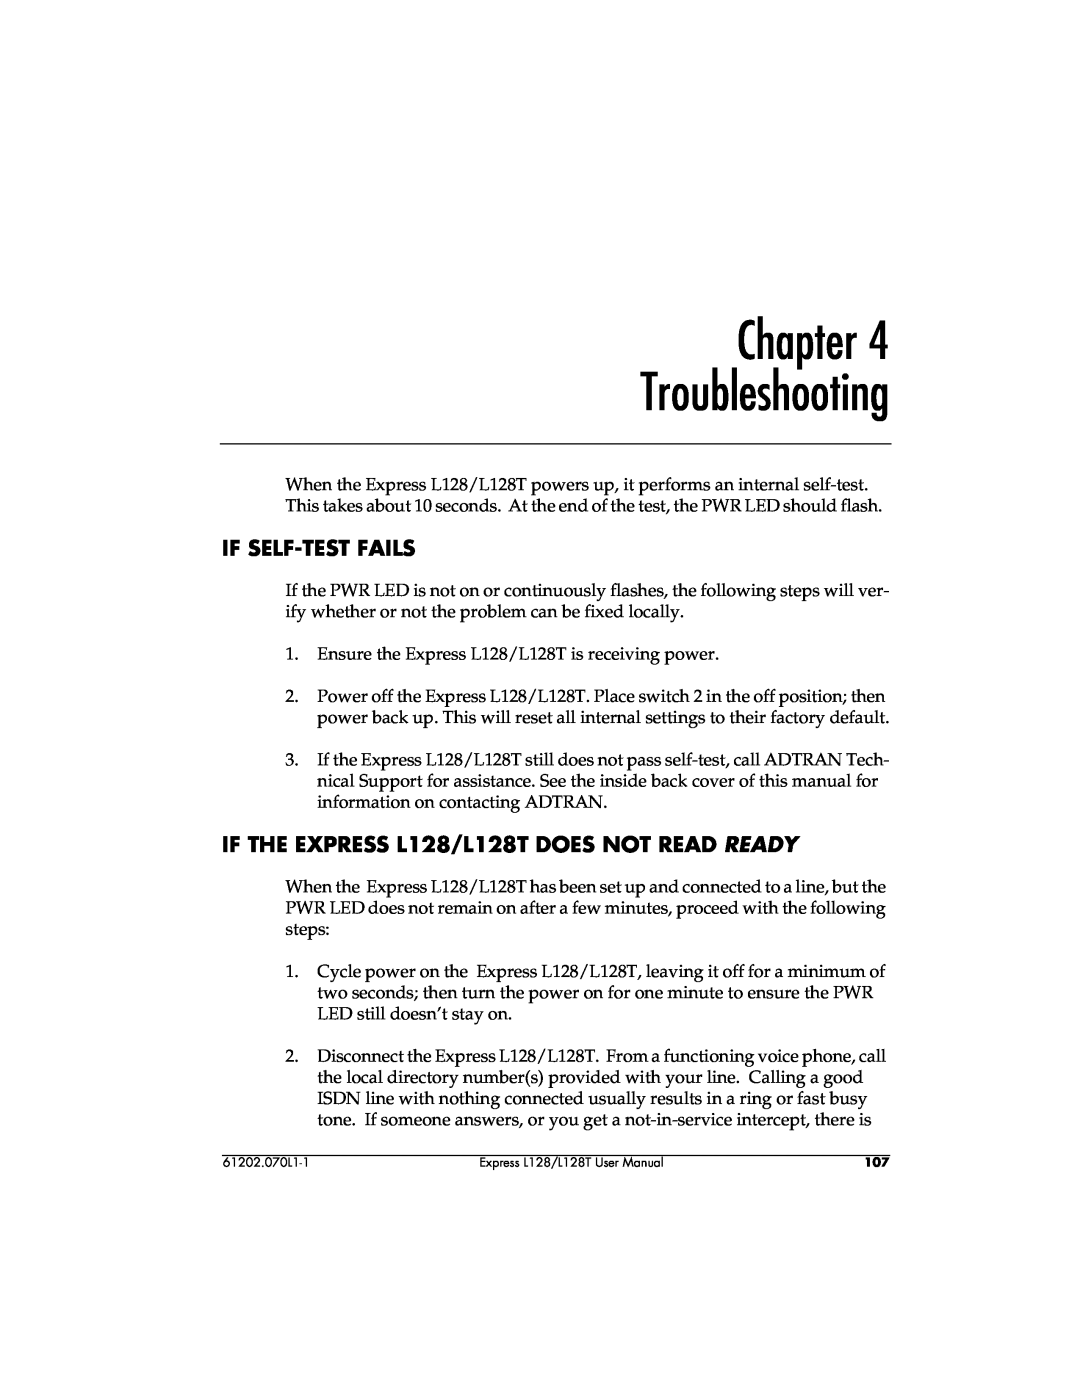 ADTRAN user manual Chapter Troubleshooting, If Self-Test Fails, IF THE EXPRESS L128/L128T DOES NOT READ READY 